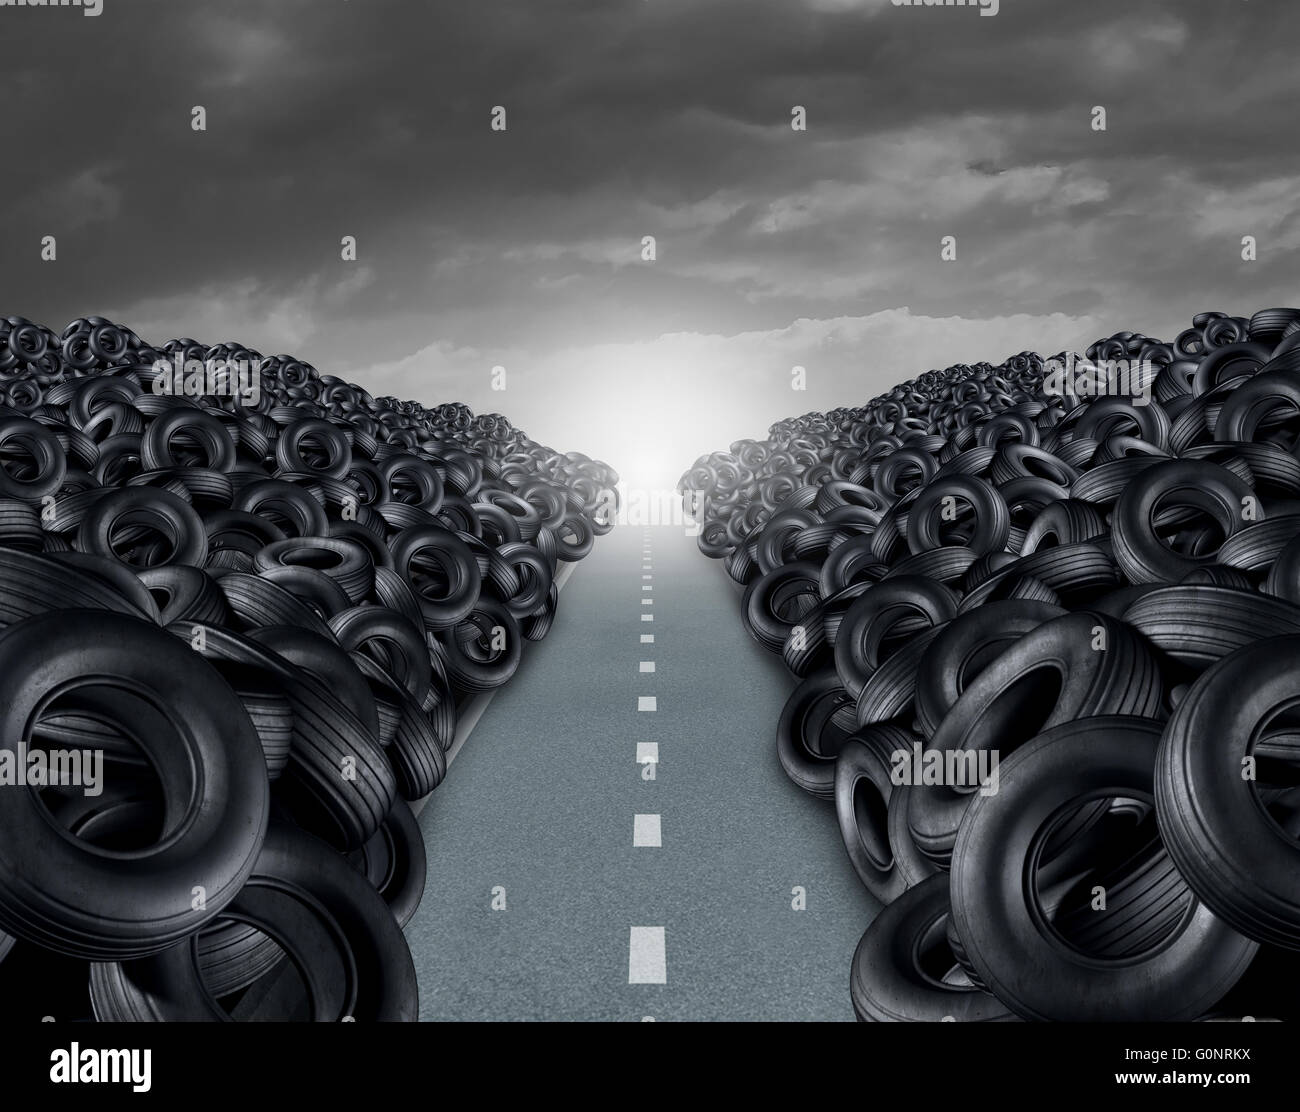 Tire or tyre landfill automotive transportation concept as a heap of black rubber wheels stacked high with a clear road path as Stock Photo